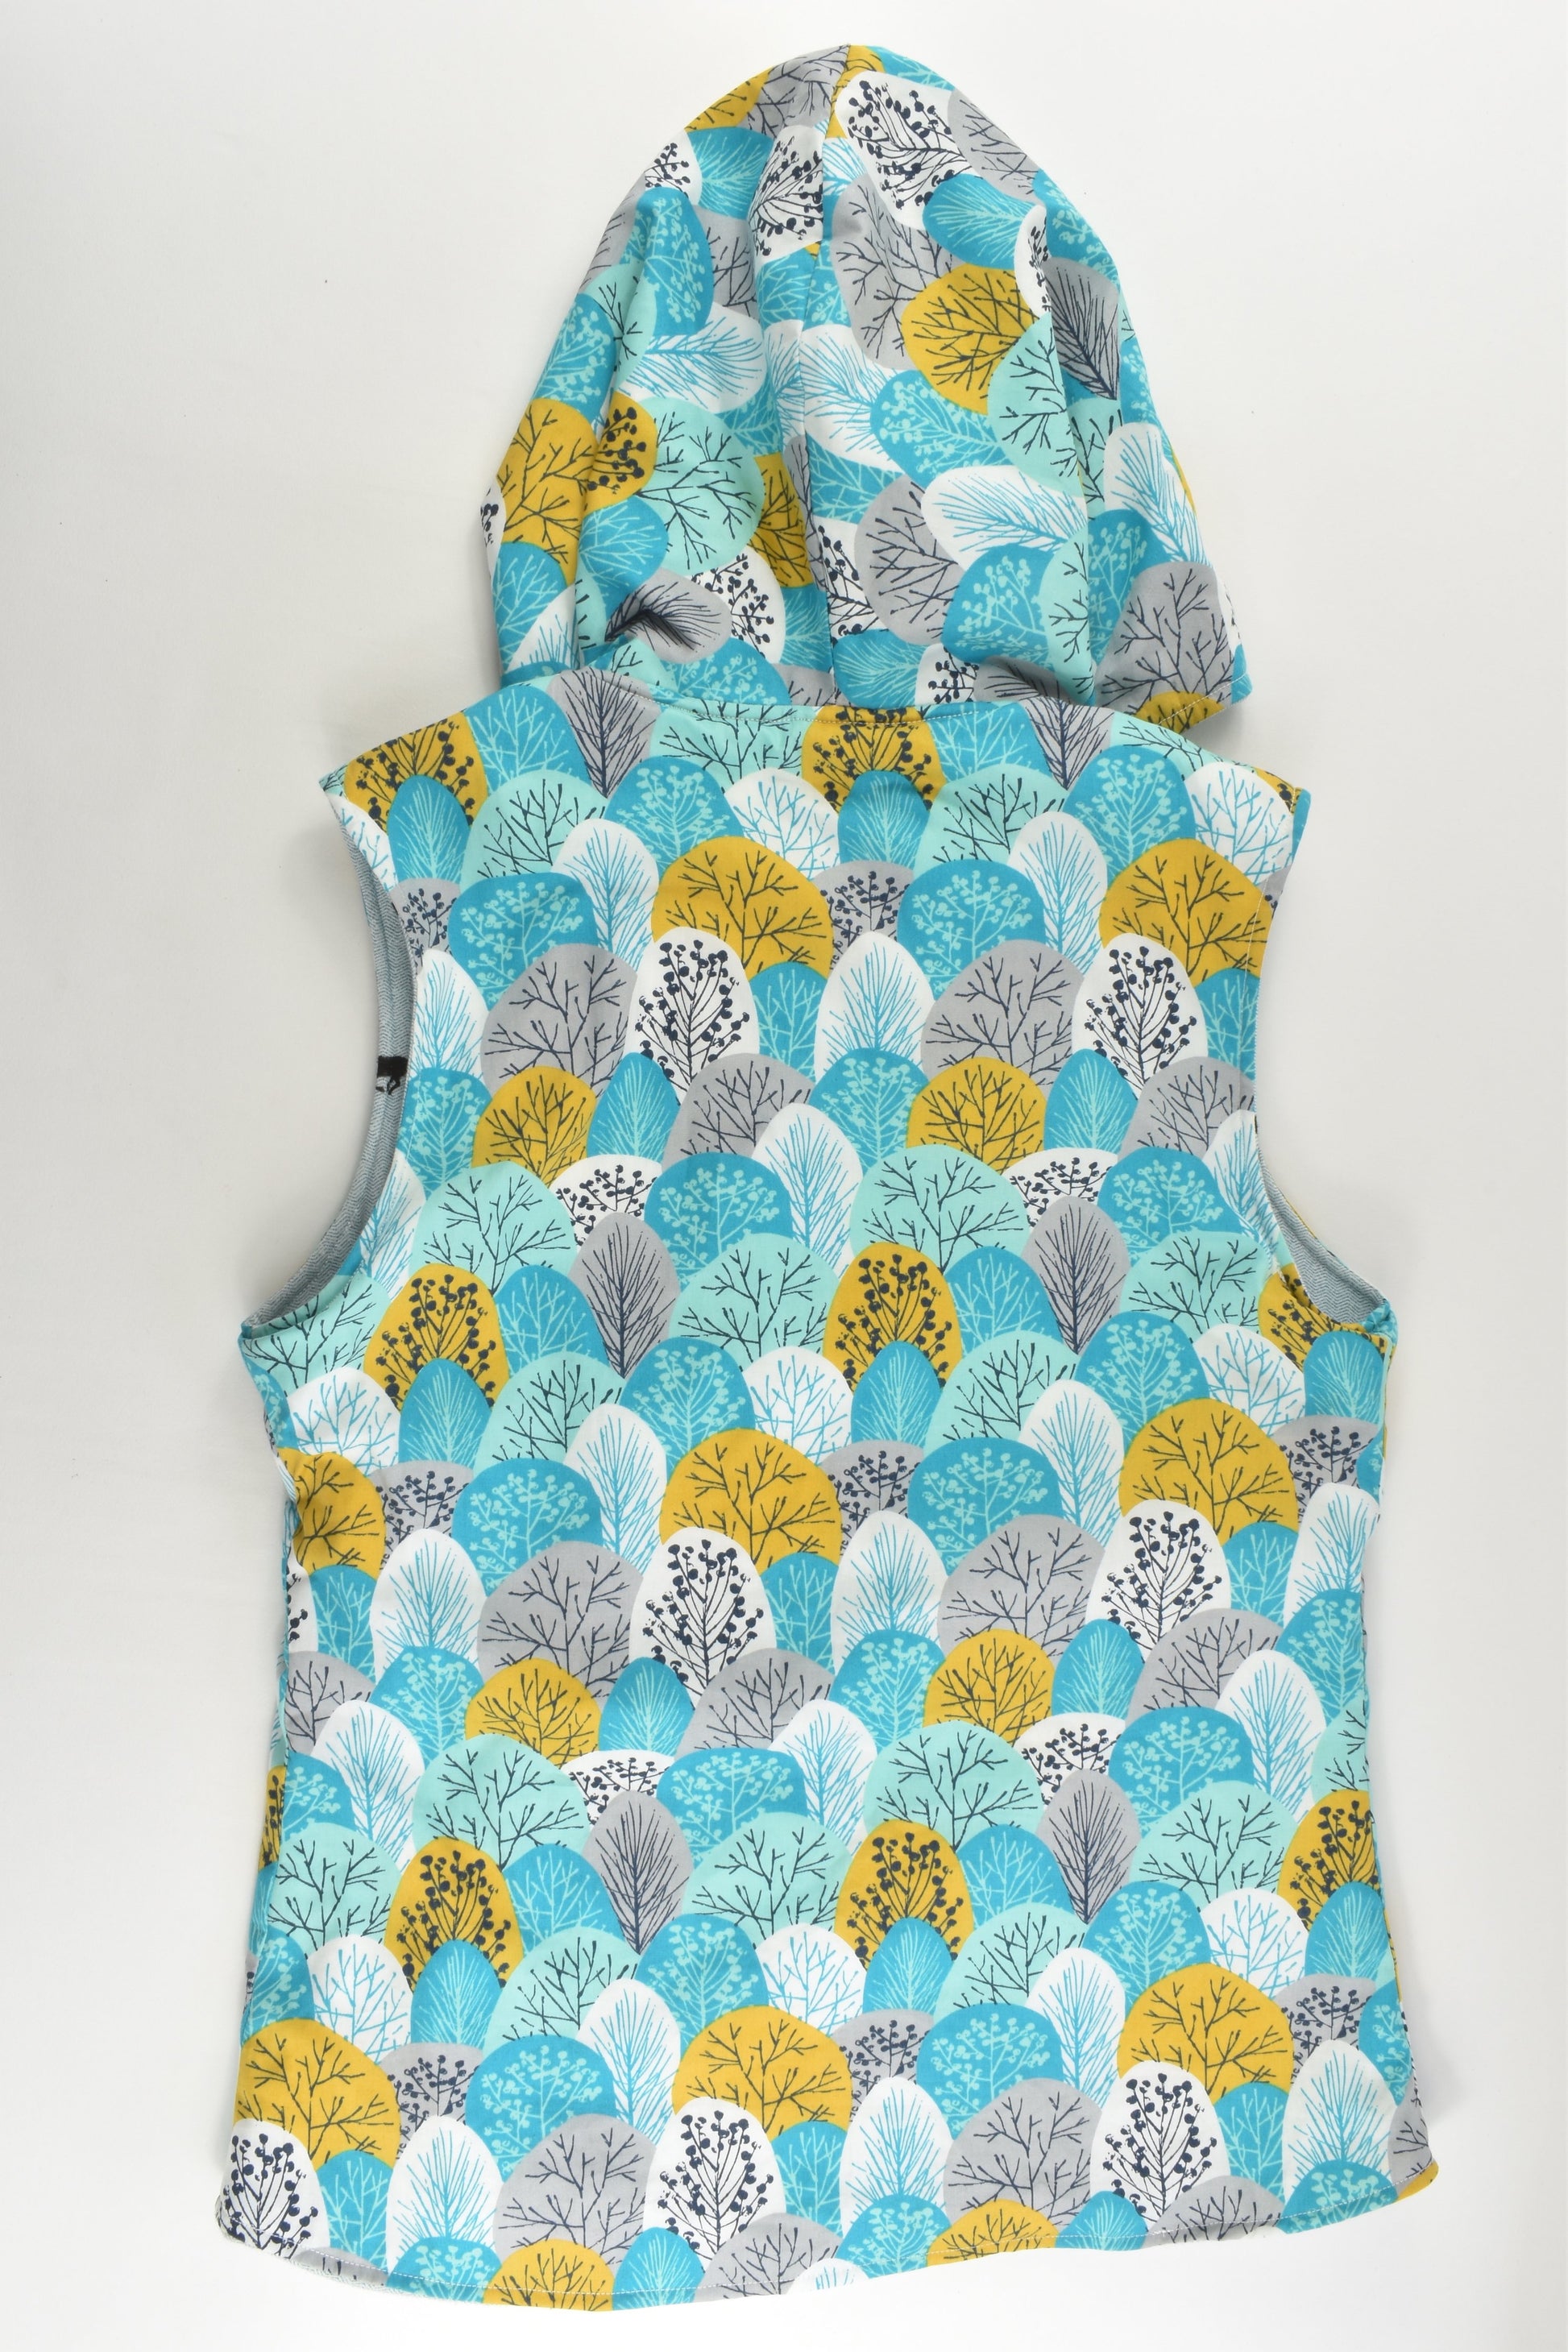 Handmade Size approx 8-10 Horses/Trees Reversible Hooded Vest